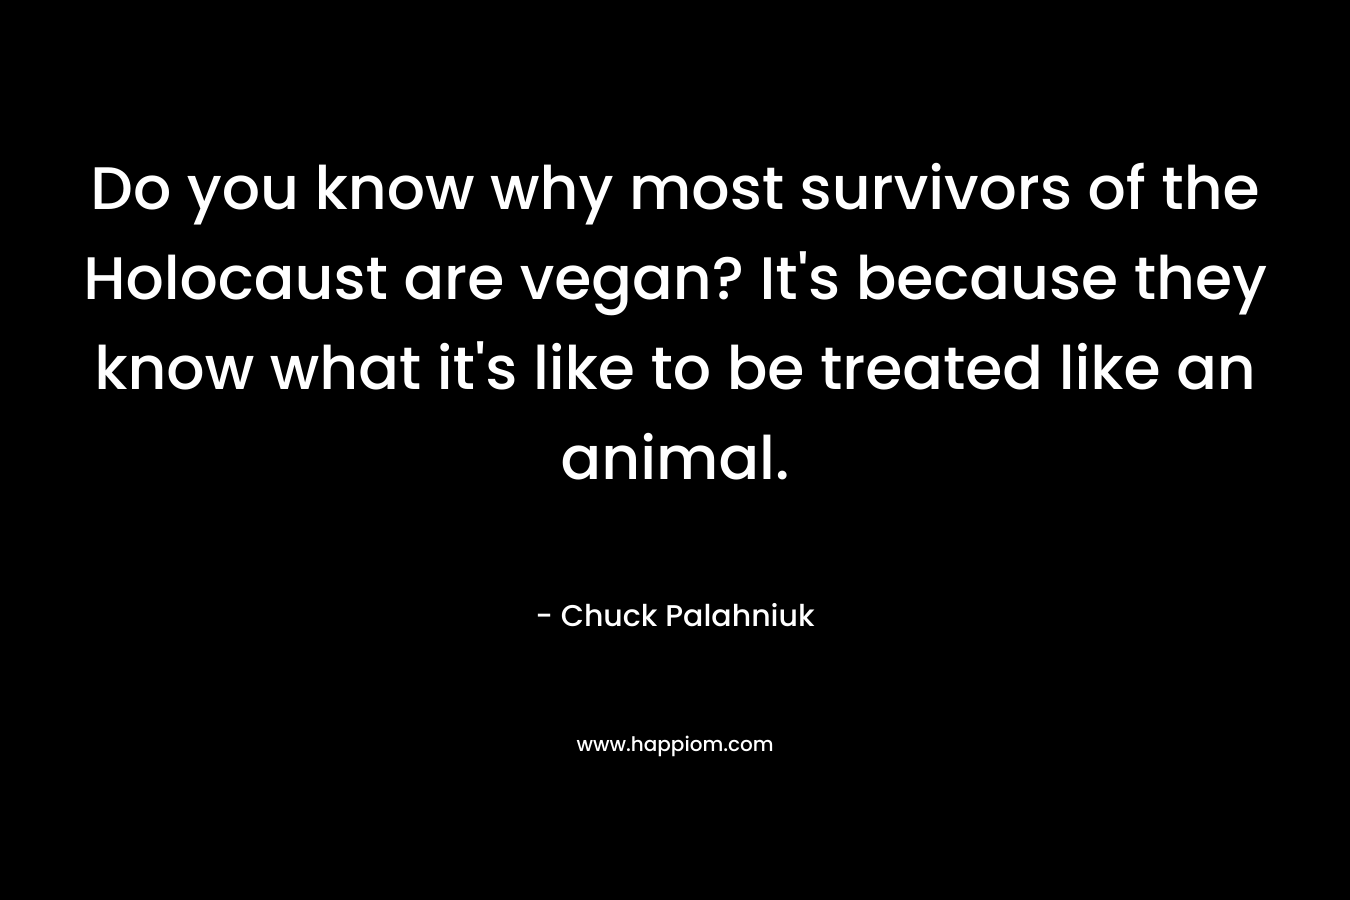 Do you know why most survivors of the Holocaust are vegan? It’s because they know what it’s like to be treated like an animal. – Chuck Palahniuk